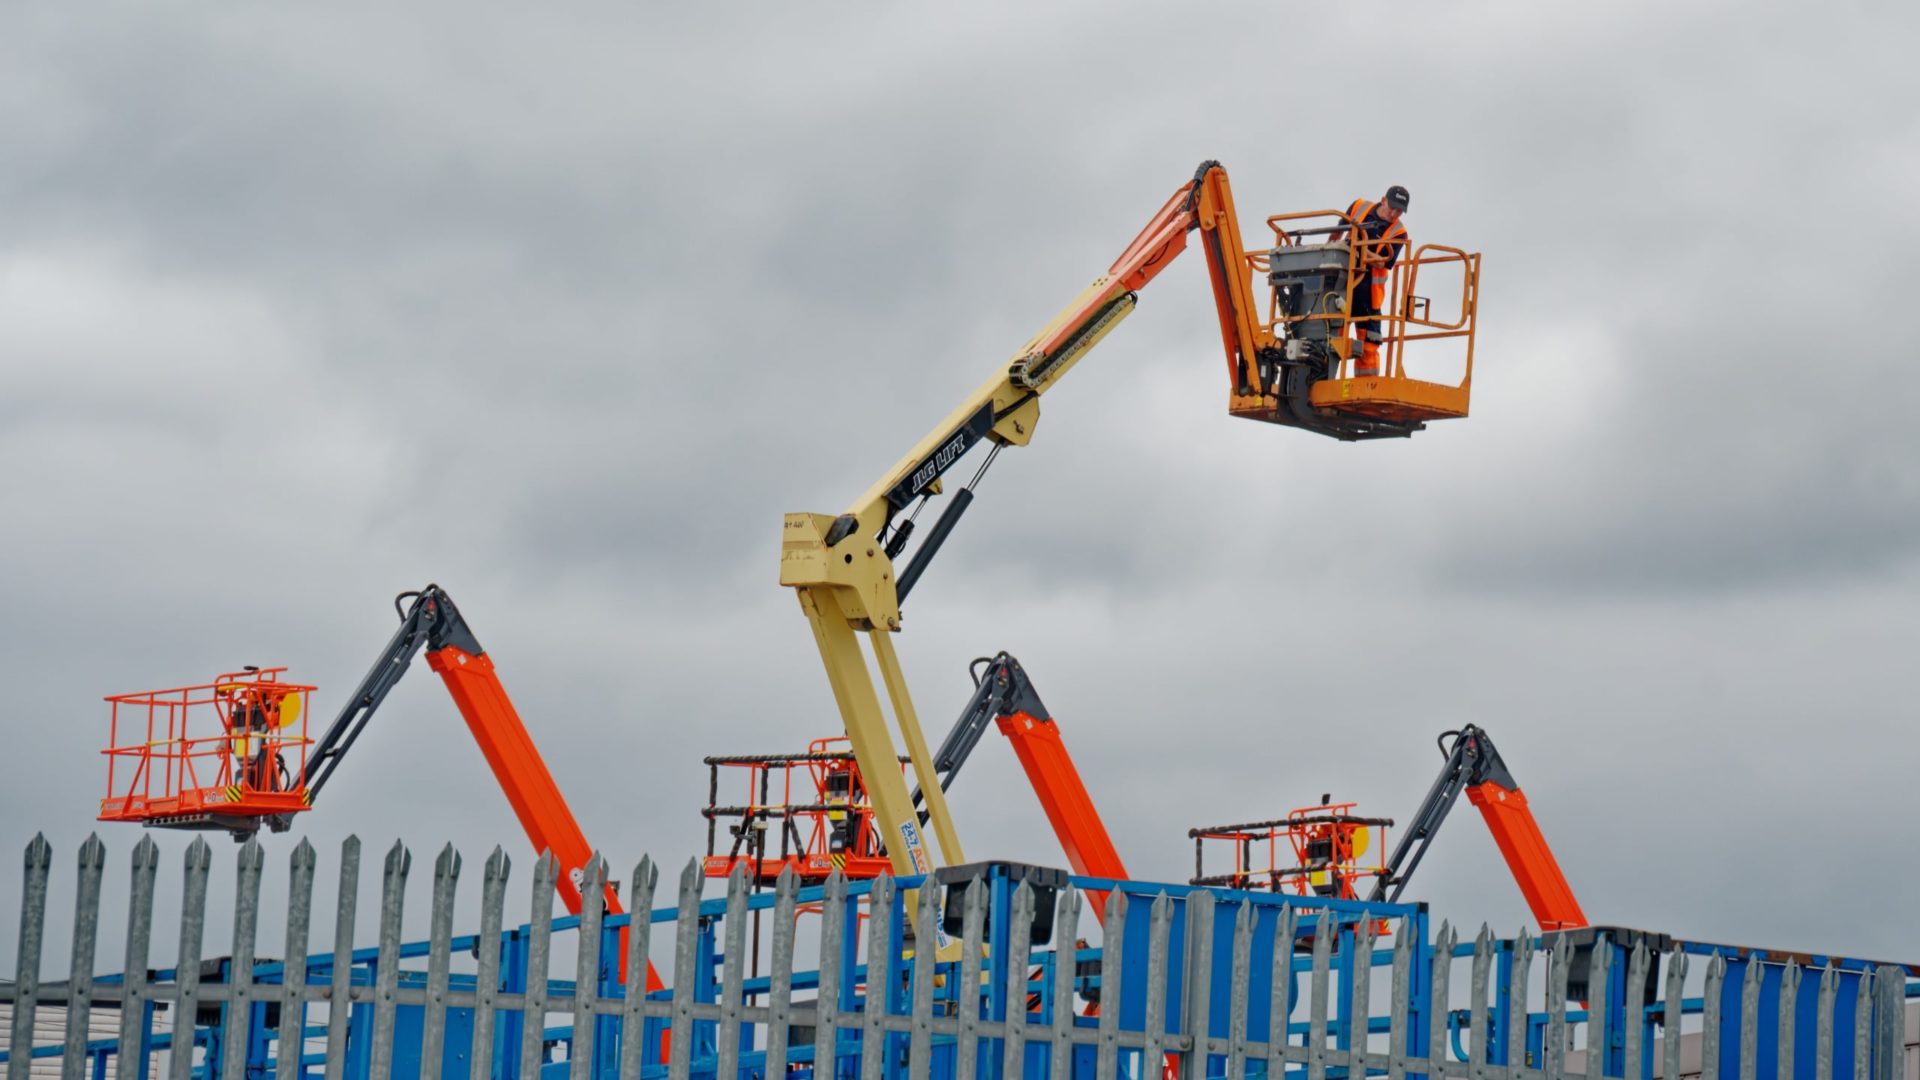 Fatalities powered access - Access platform machines in a building site.